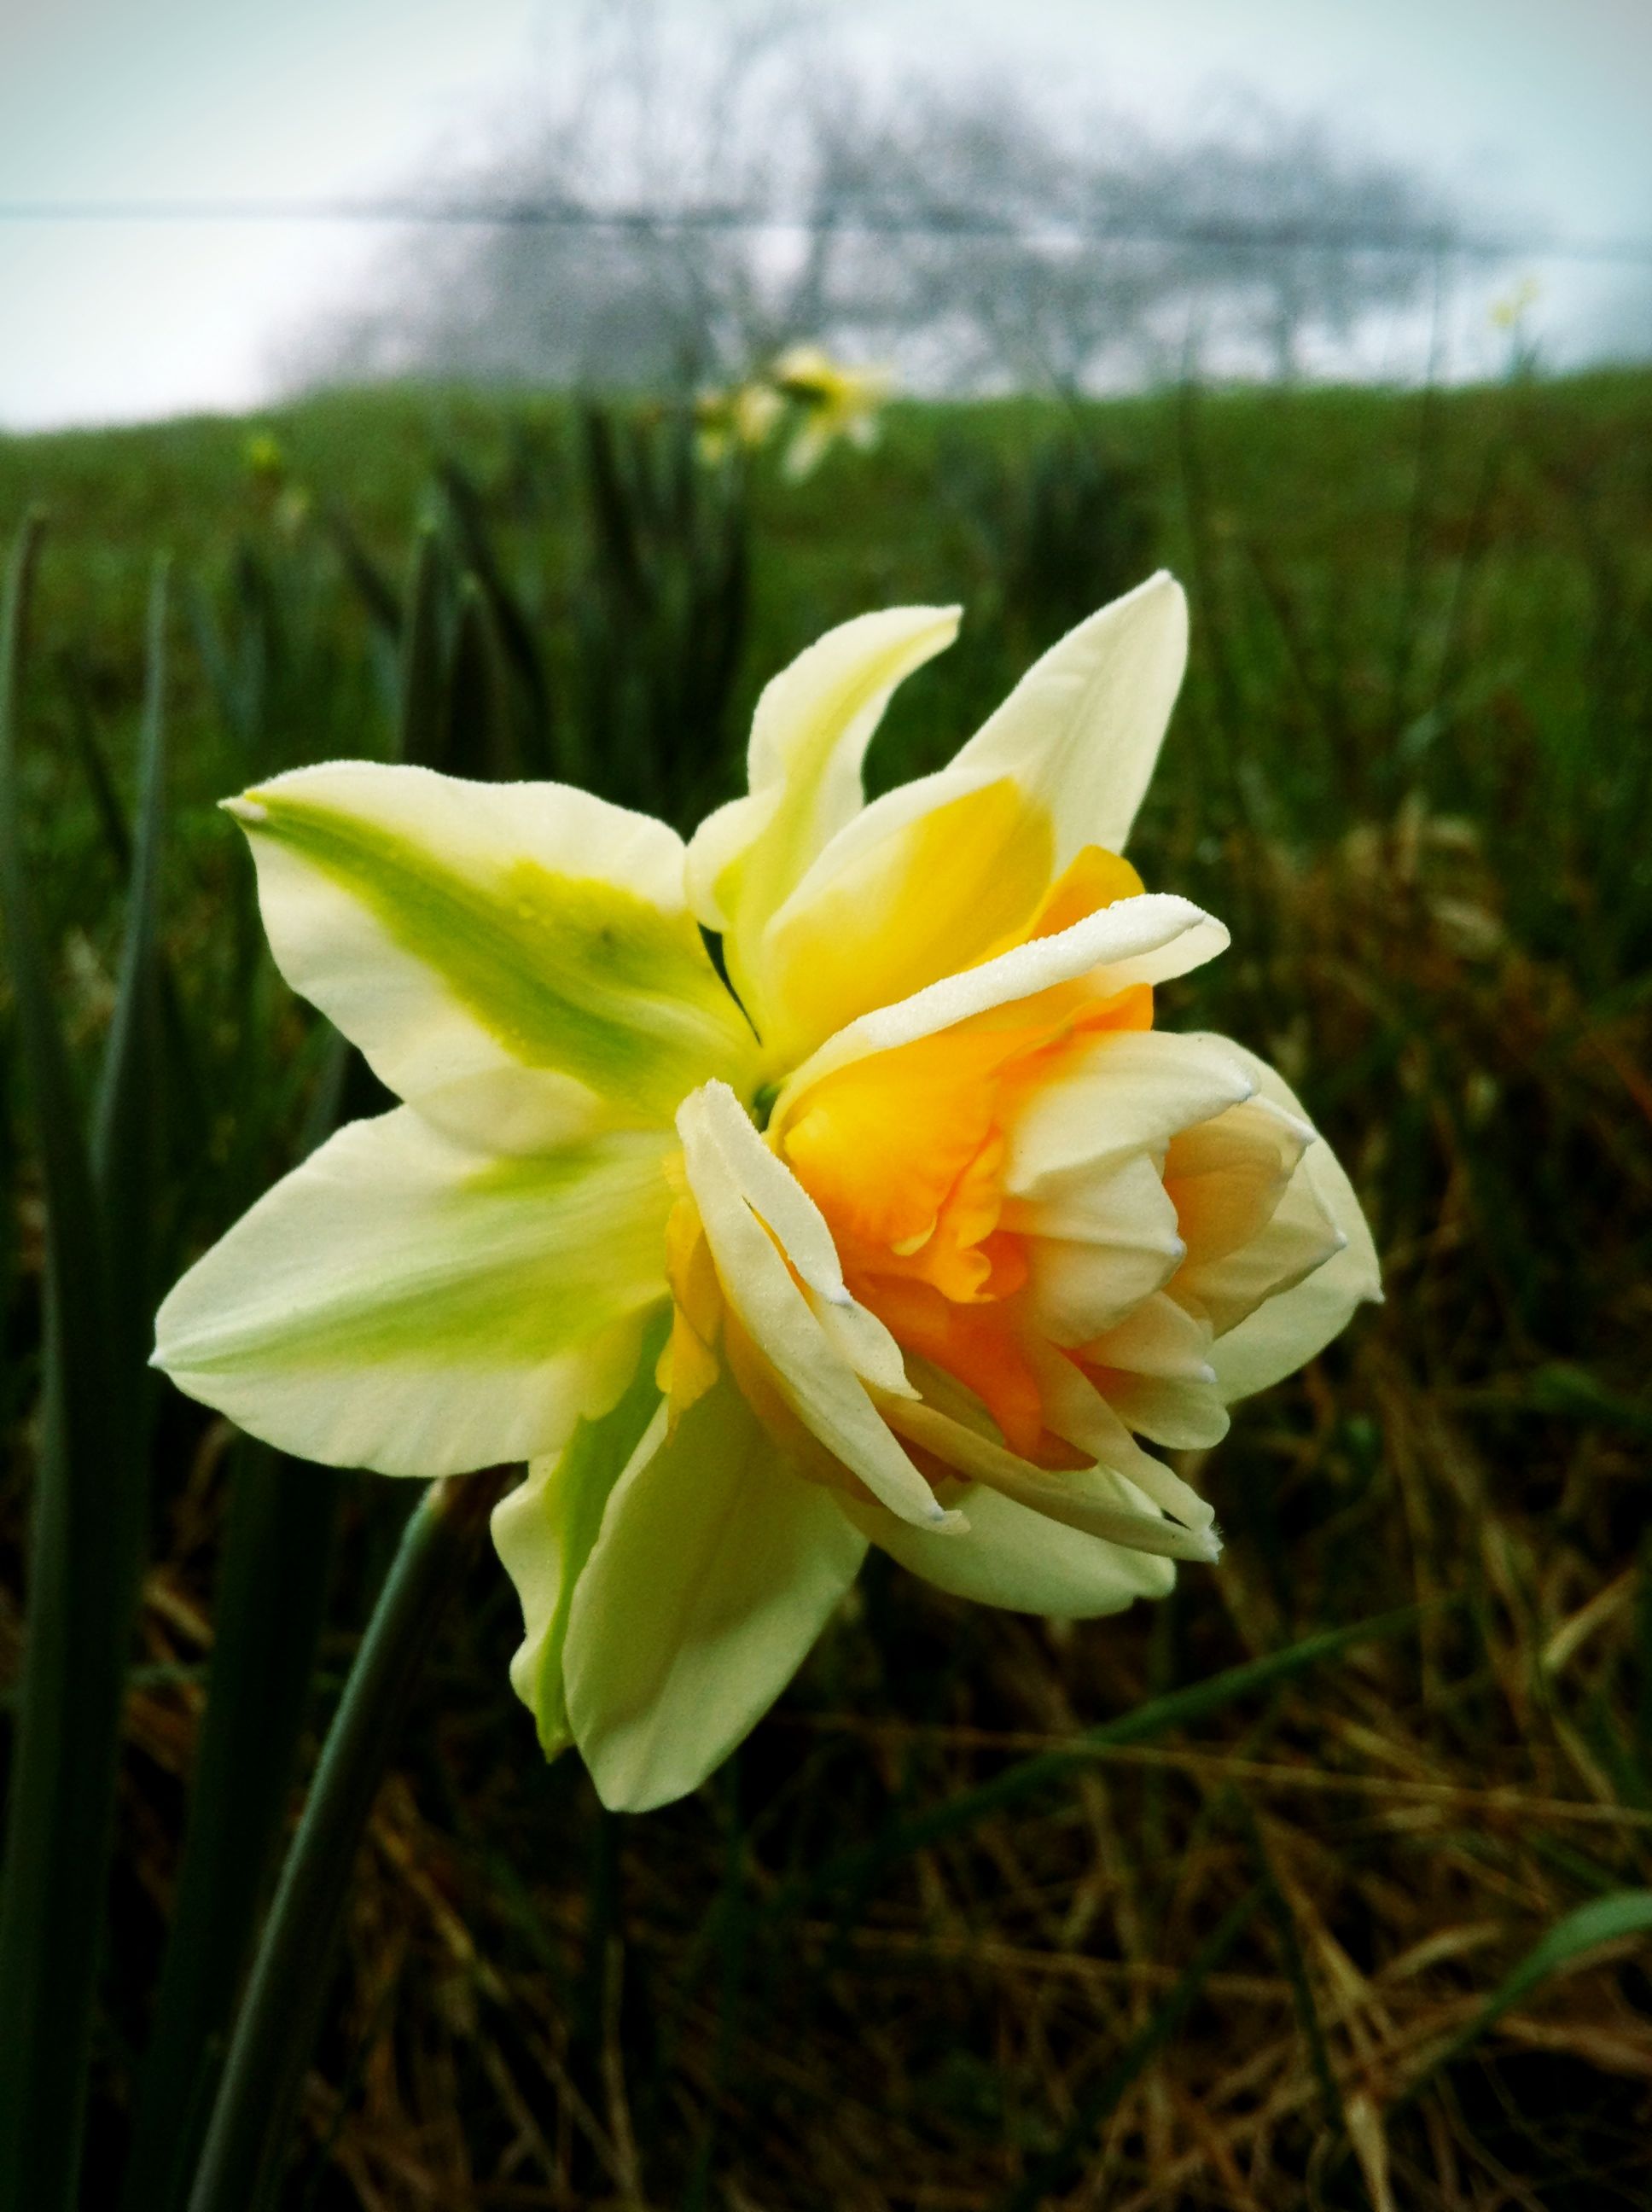 Daffodil at Smith Meadows, Spring 2012 (click to see slide show)